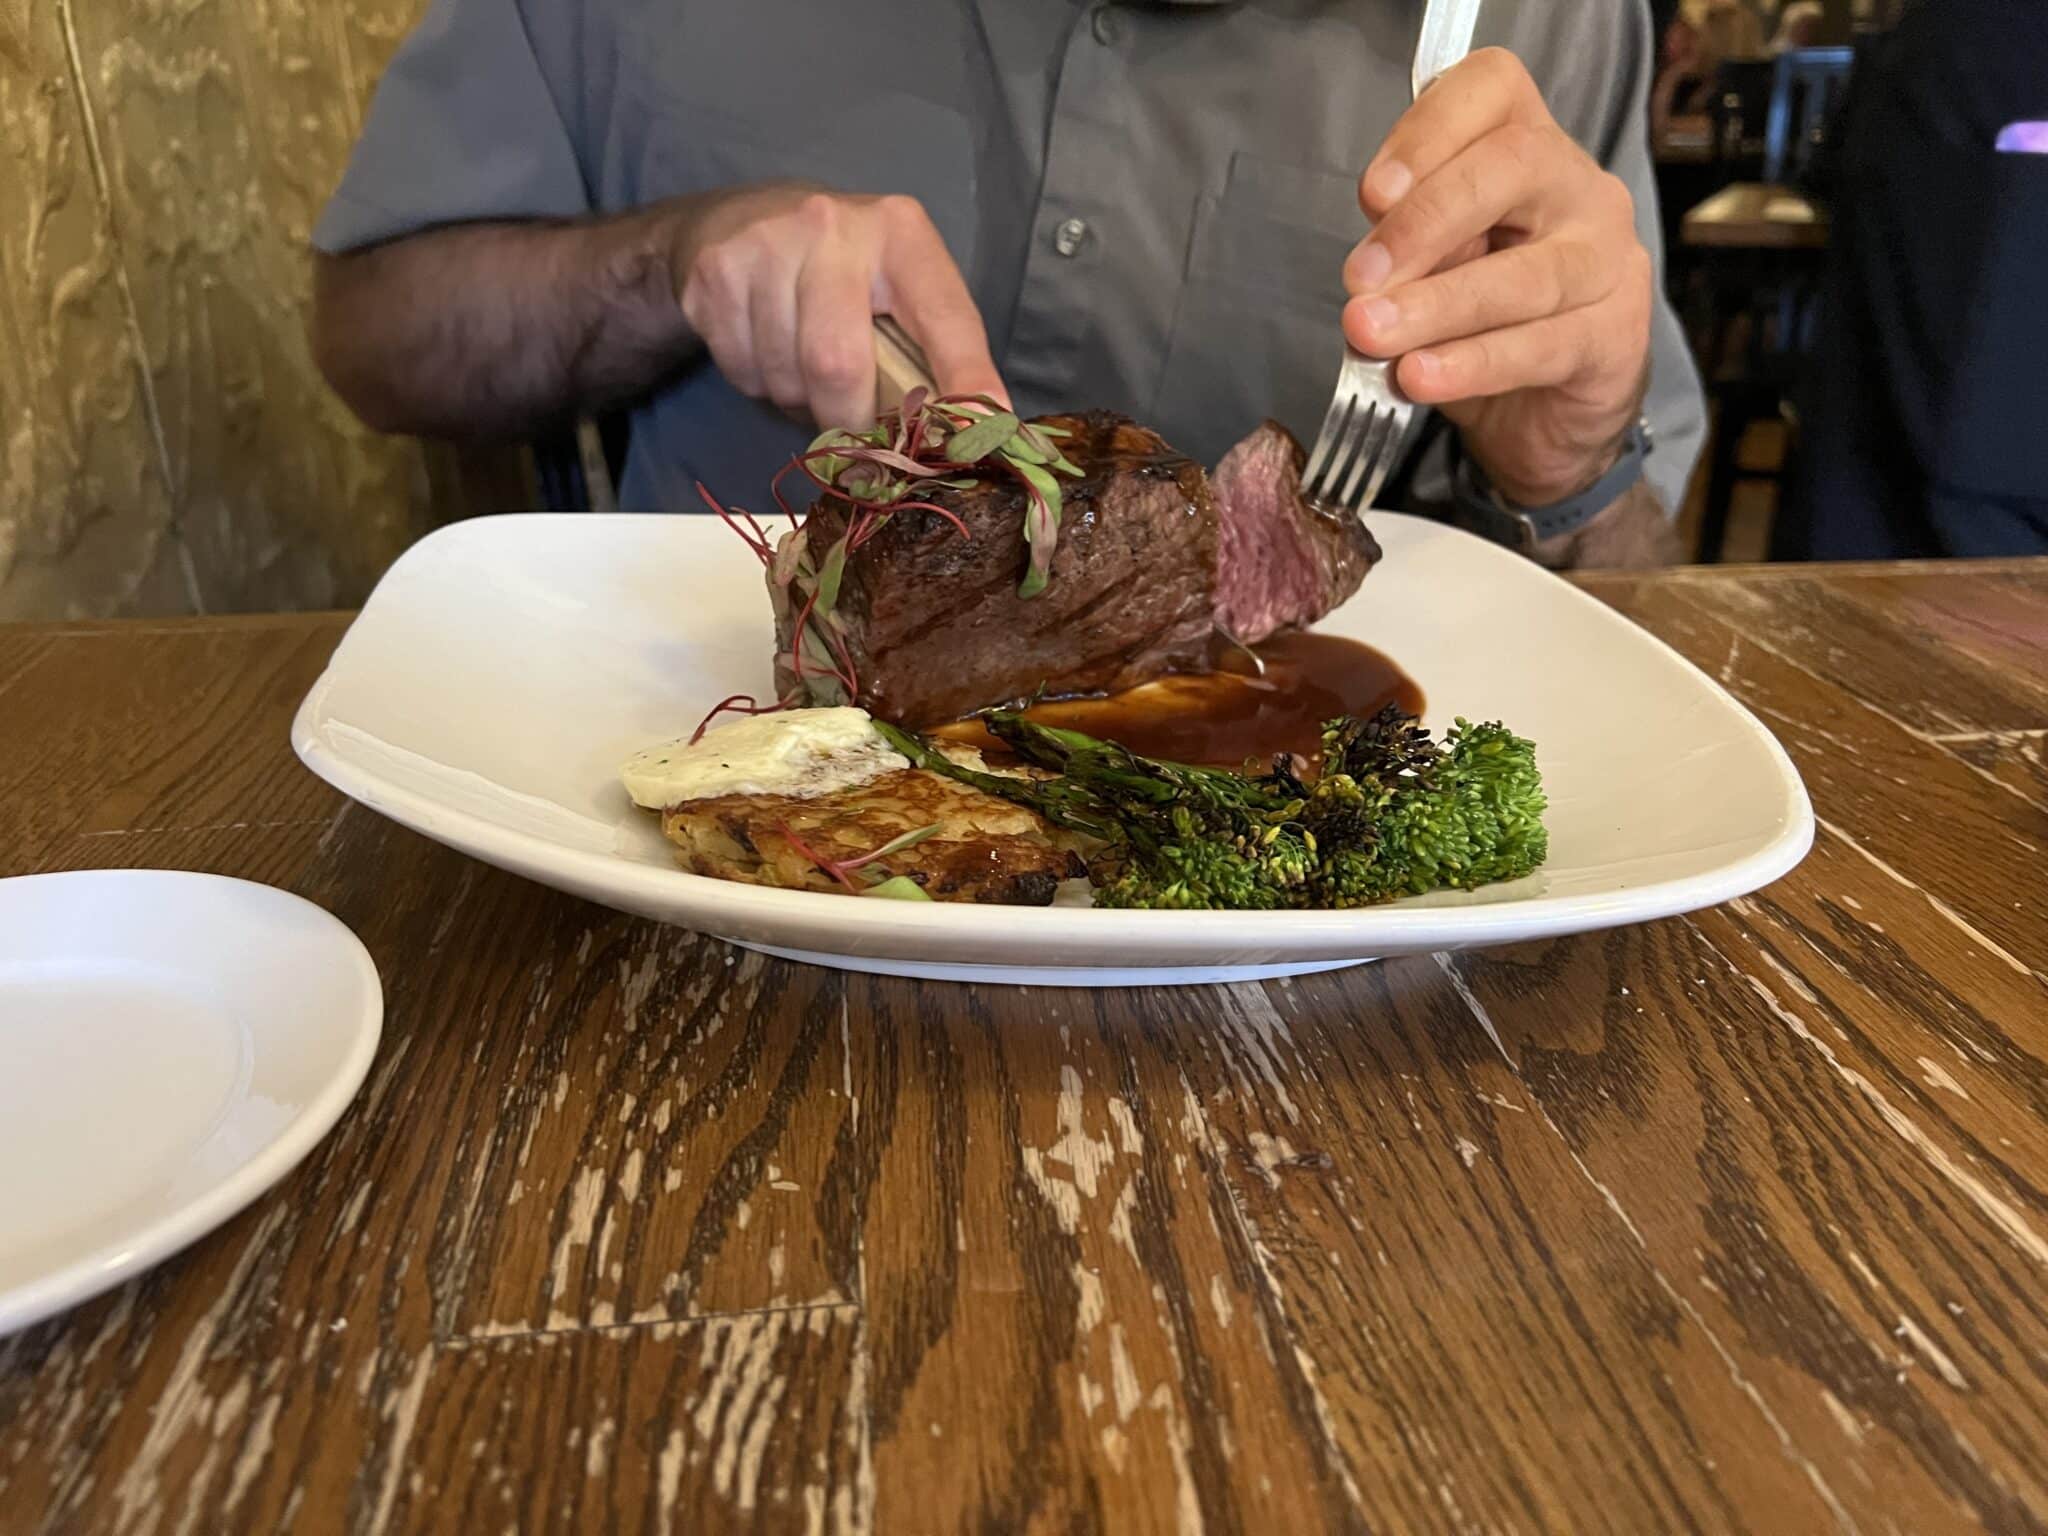 A person is shown cutting a steak on a white square plate atop a wooden table. The steak is professionally plated with vegetables and sauce.